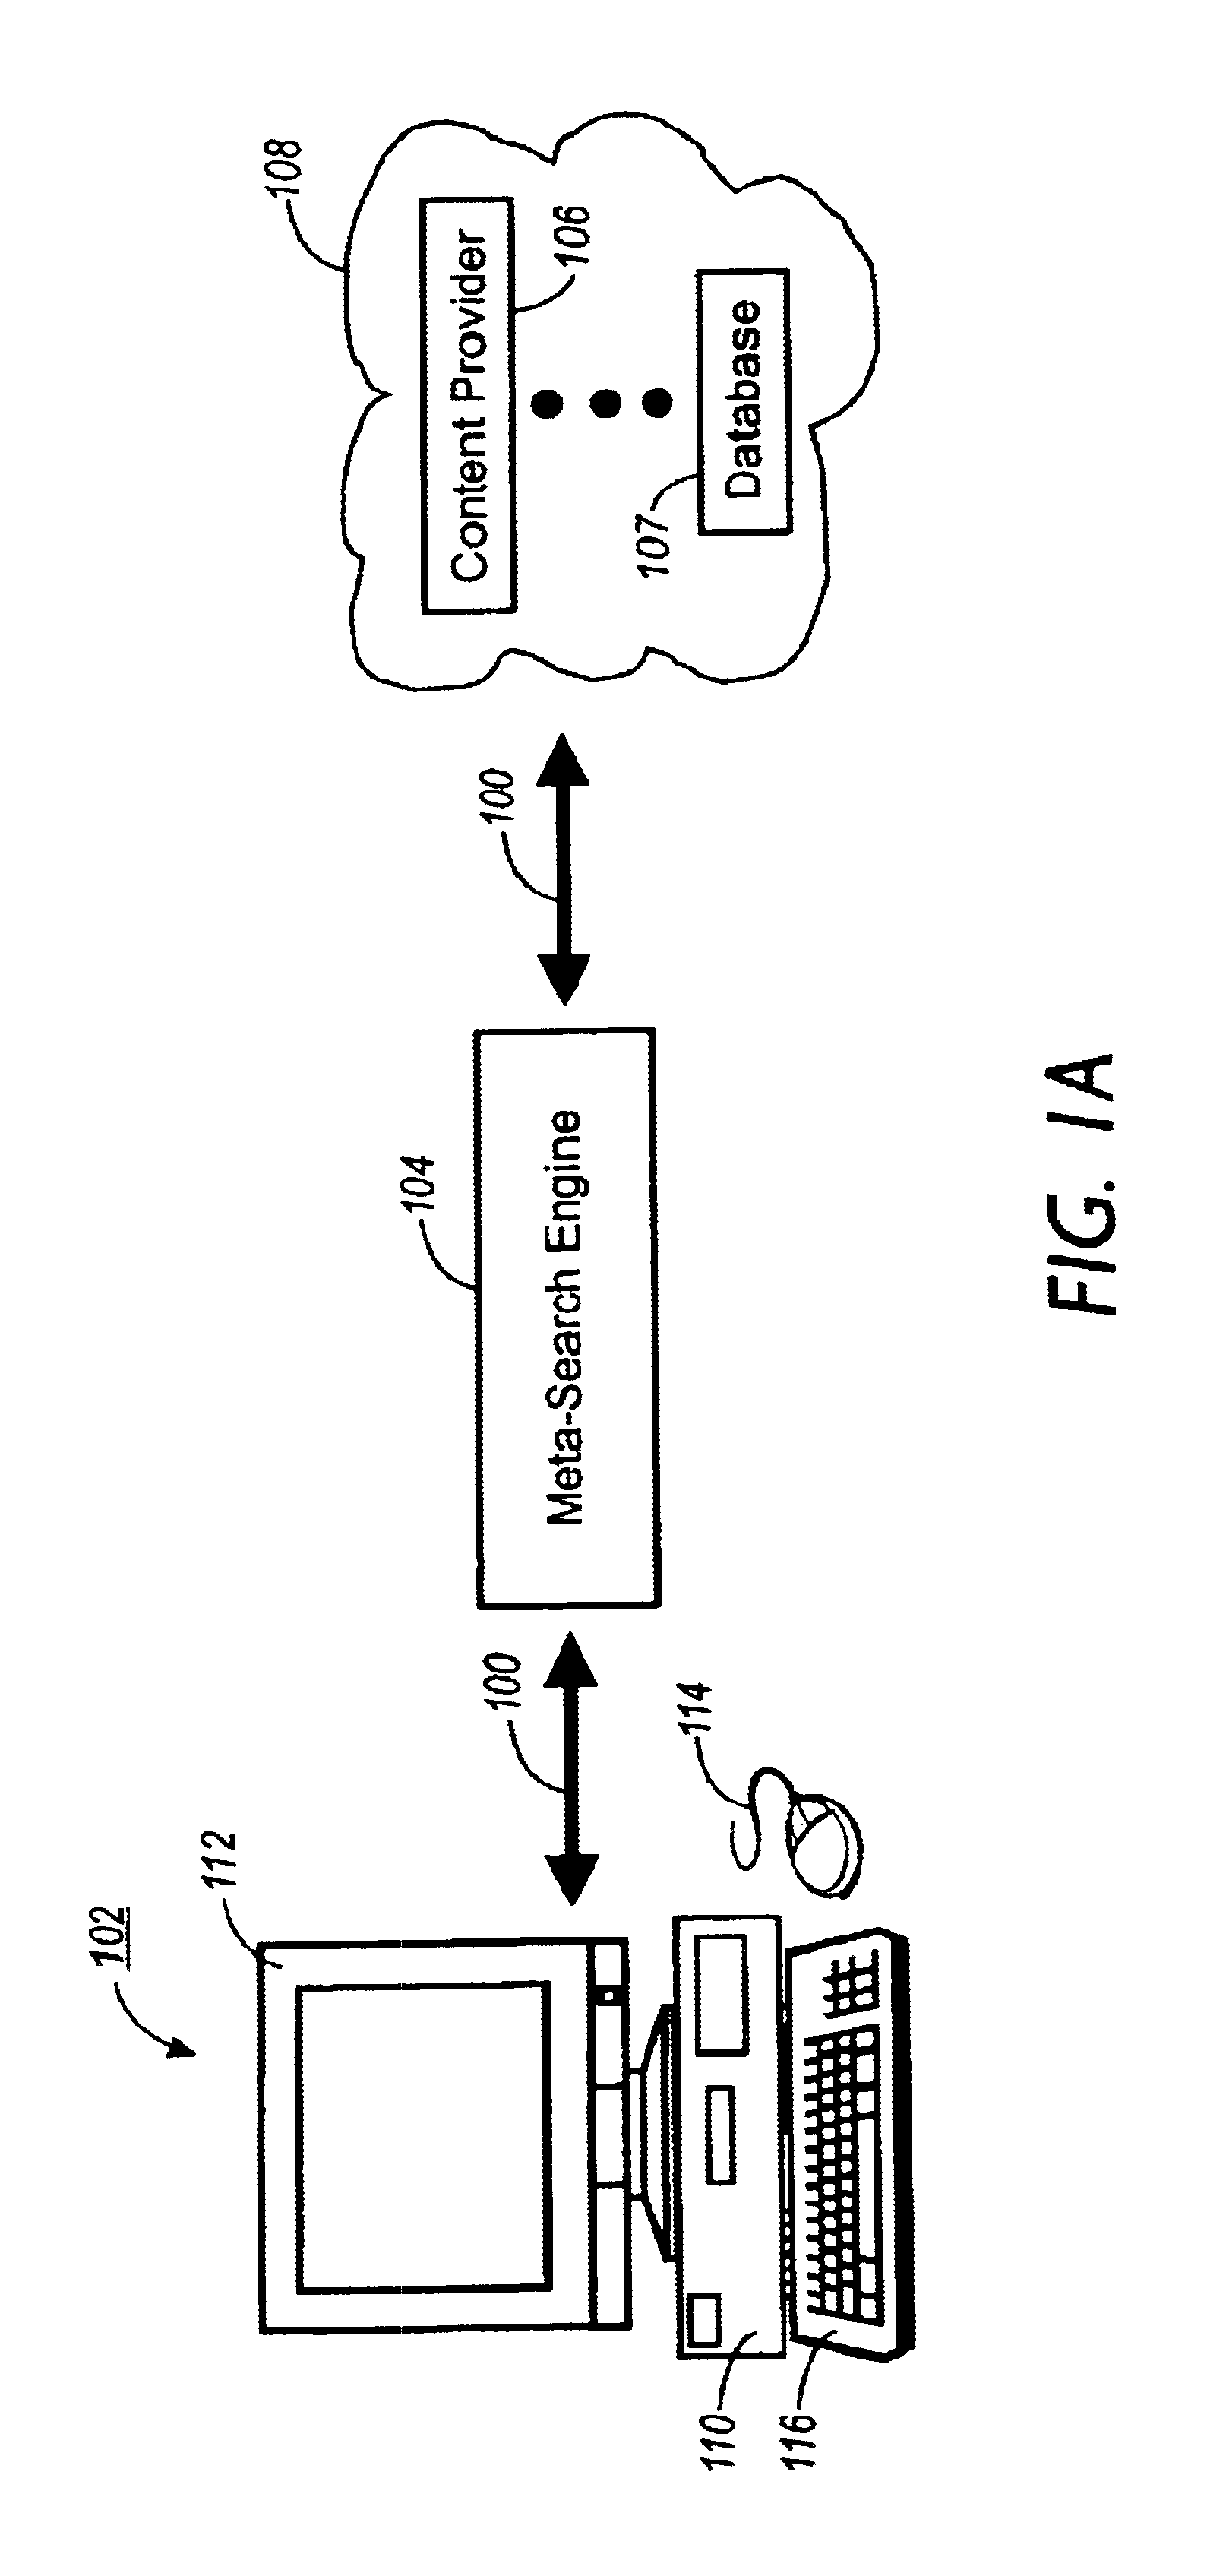 System and method for improving answer relevance in meta-search engines